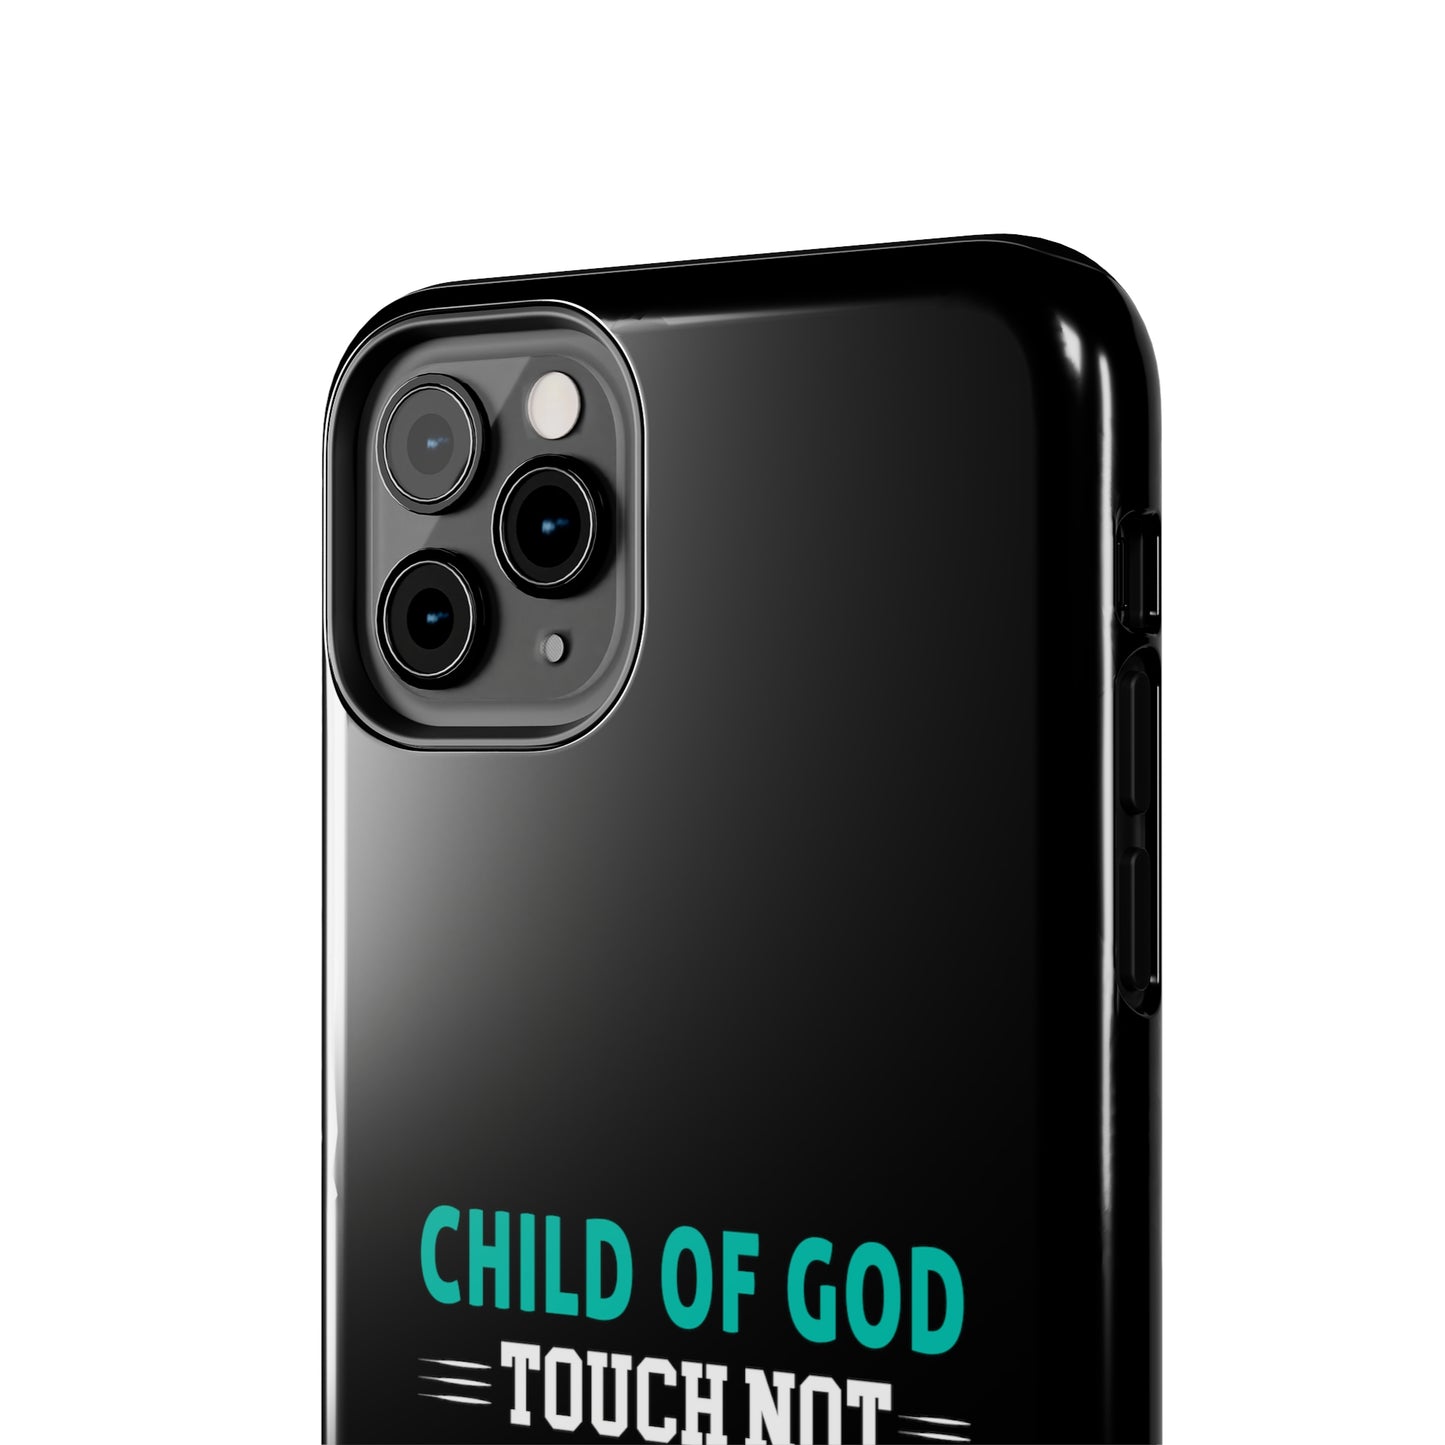 Child Of God Touch Not His Anointed Christian Phone Tough Phone Cases, Case-Mate Printify